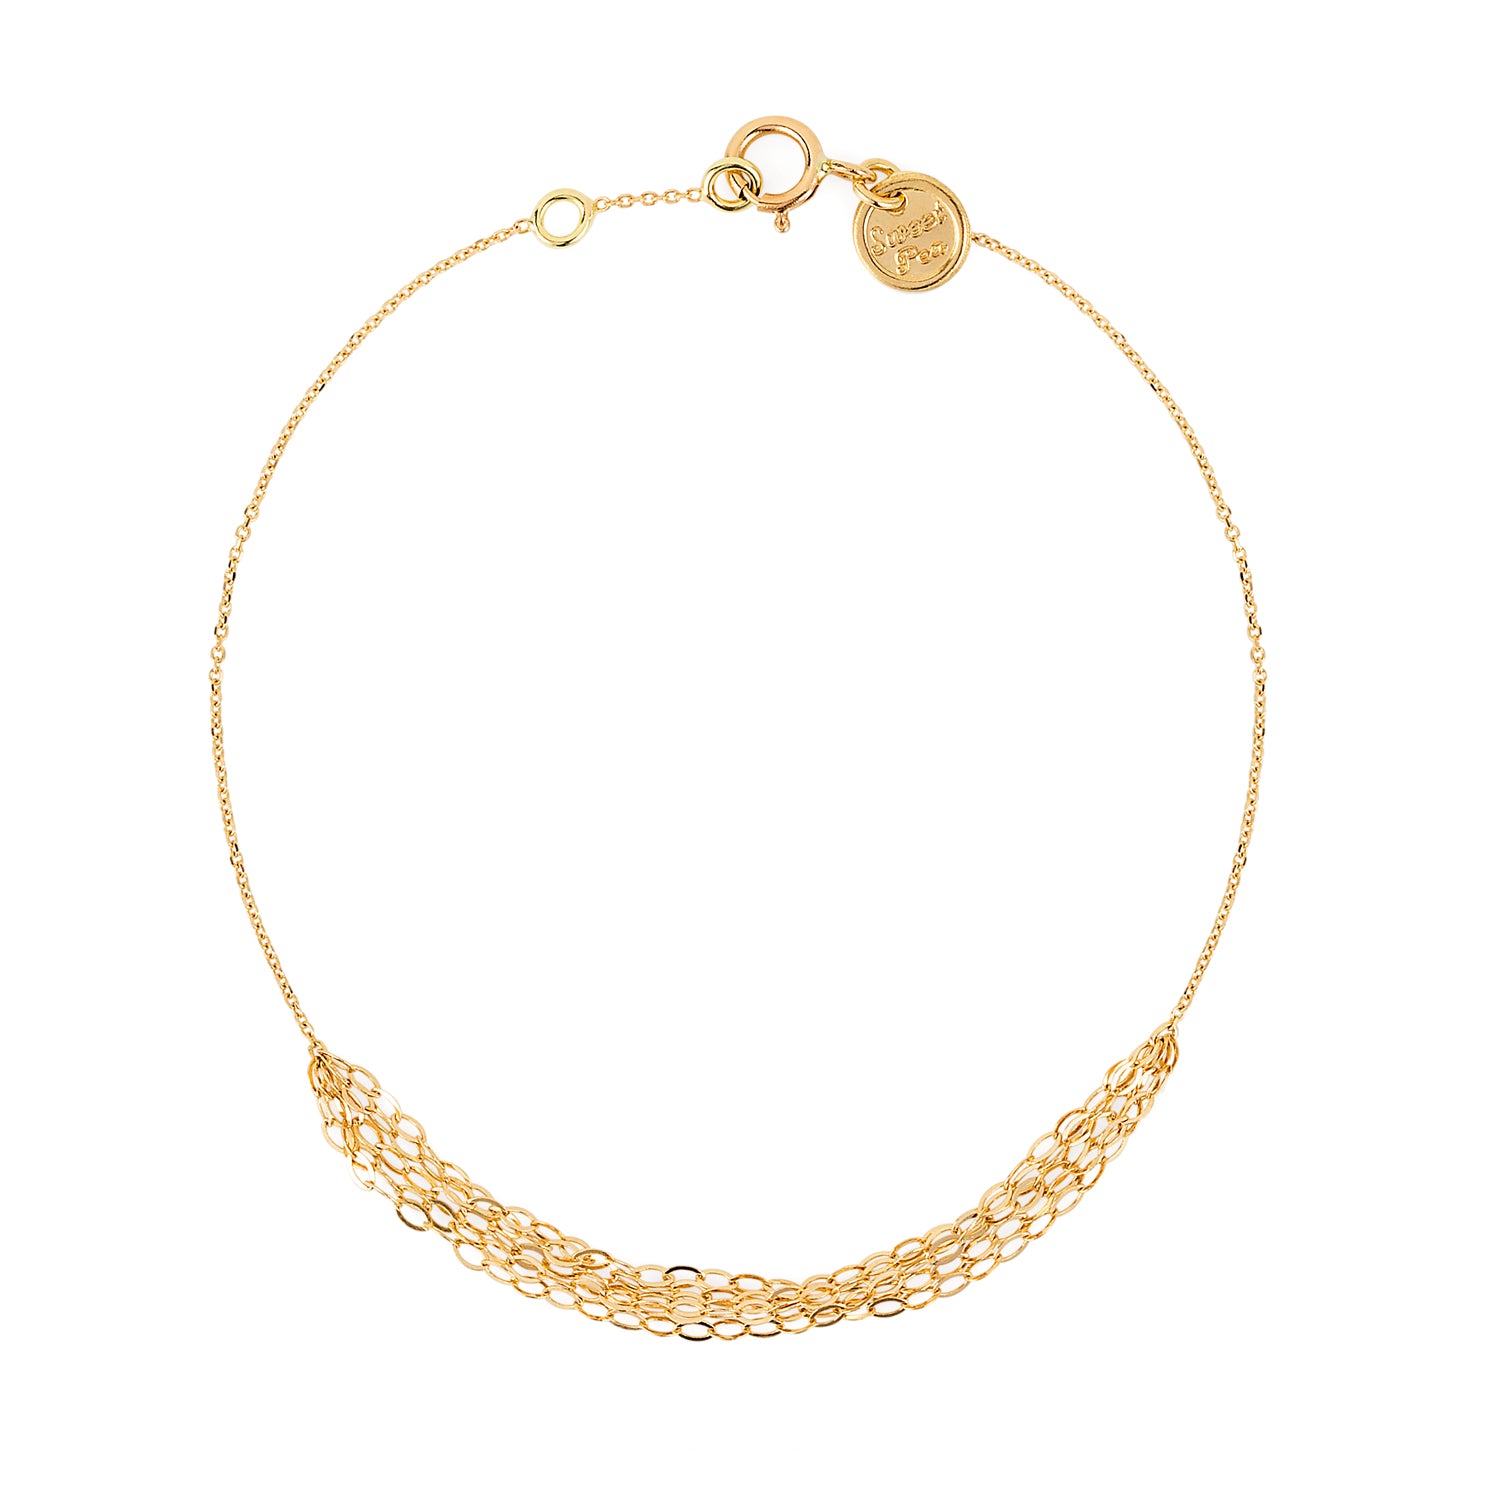 18ct yellow gold bracelet with layered chain section